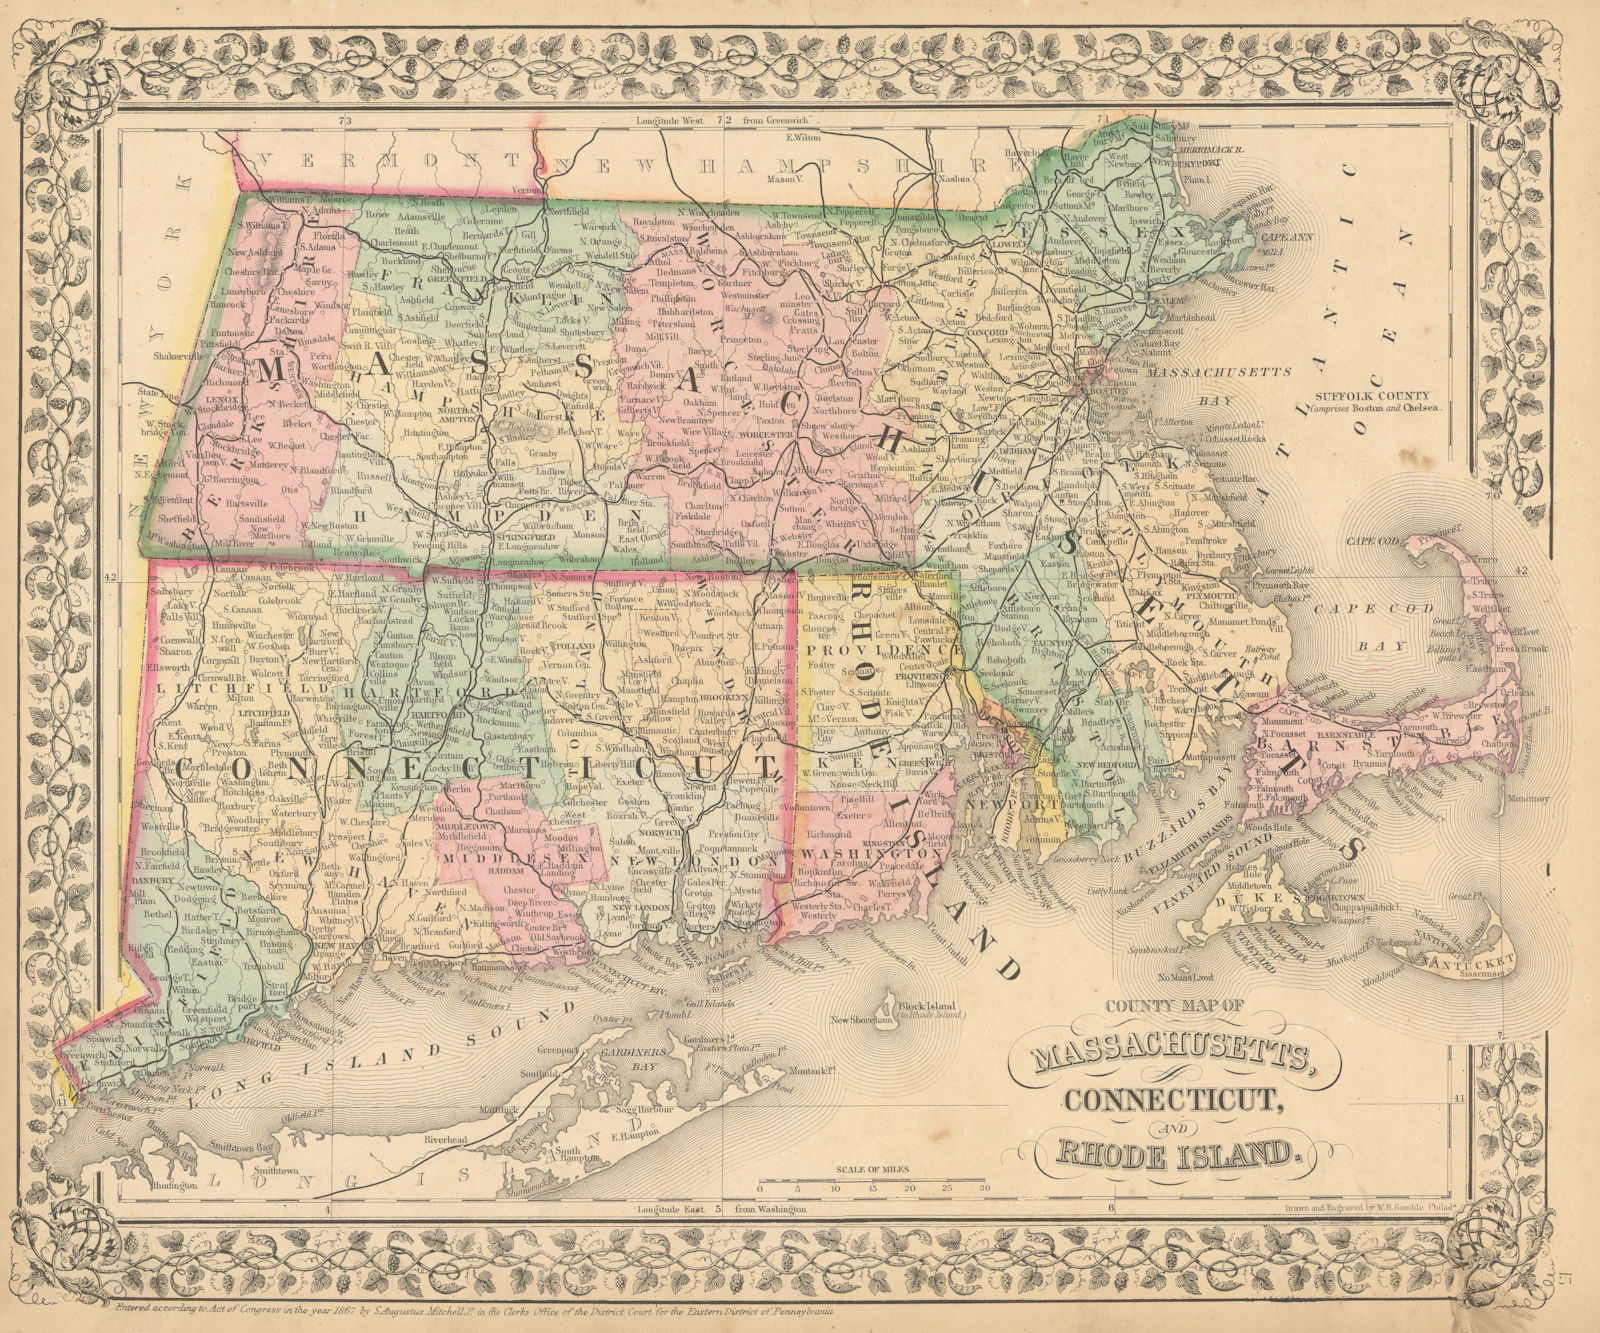 County map of Massachusetts, Connecticut, and Rhode Island. MITCHELL 1869